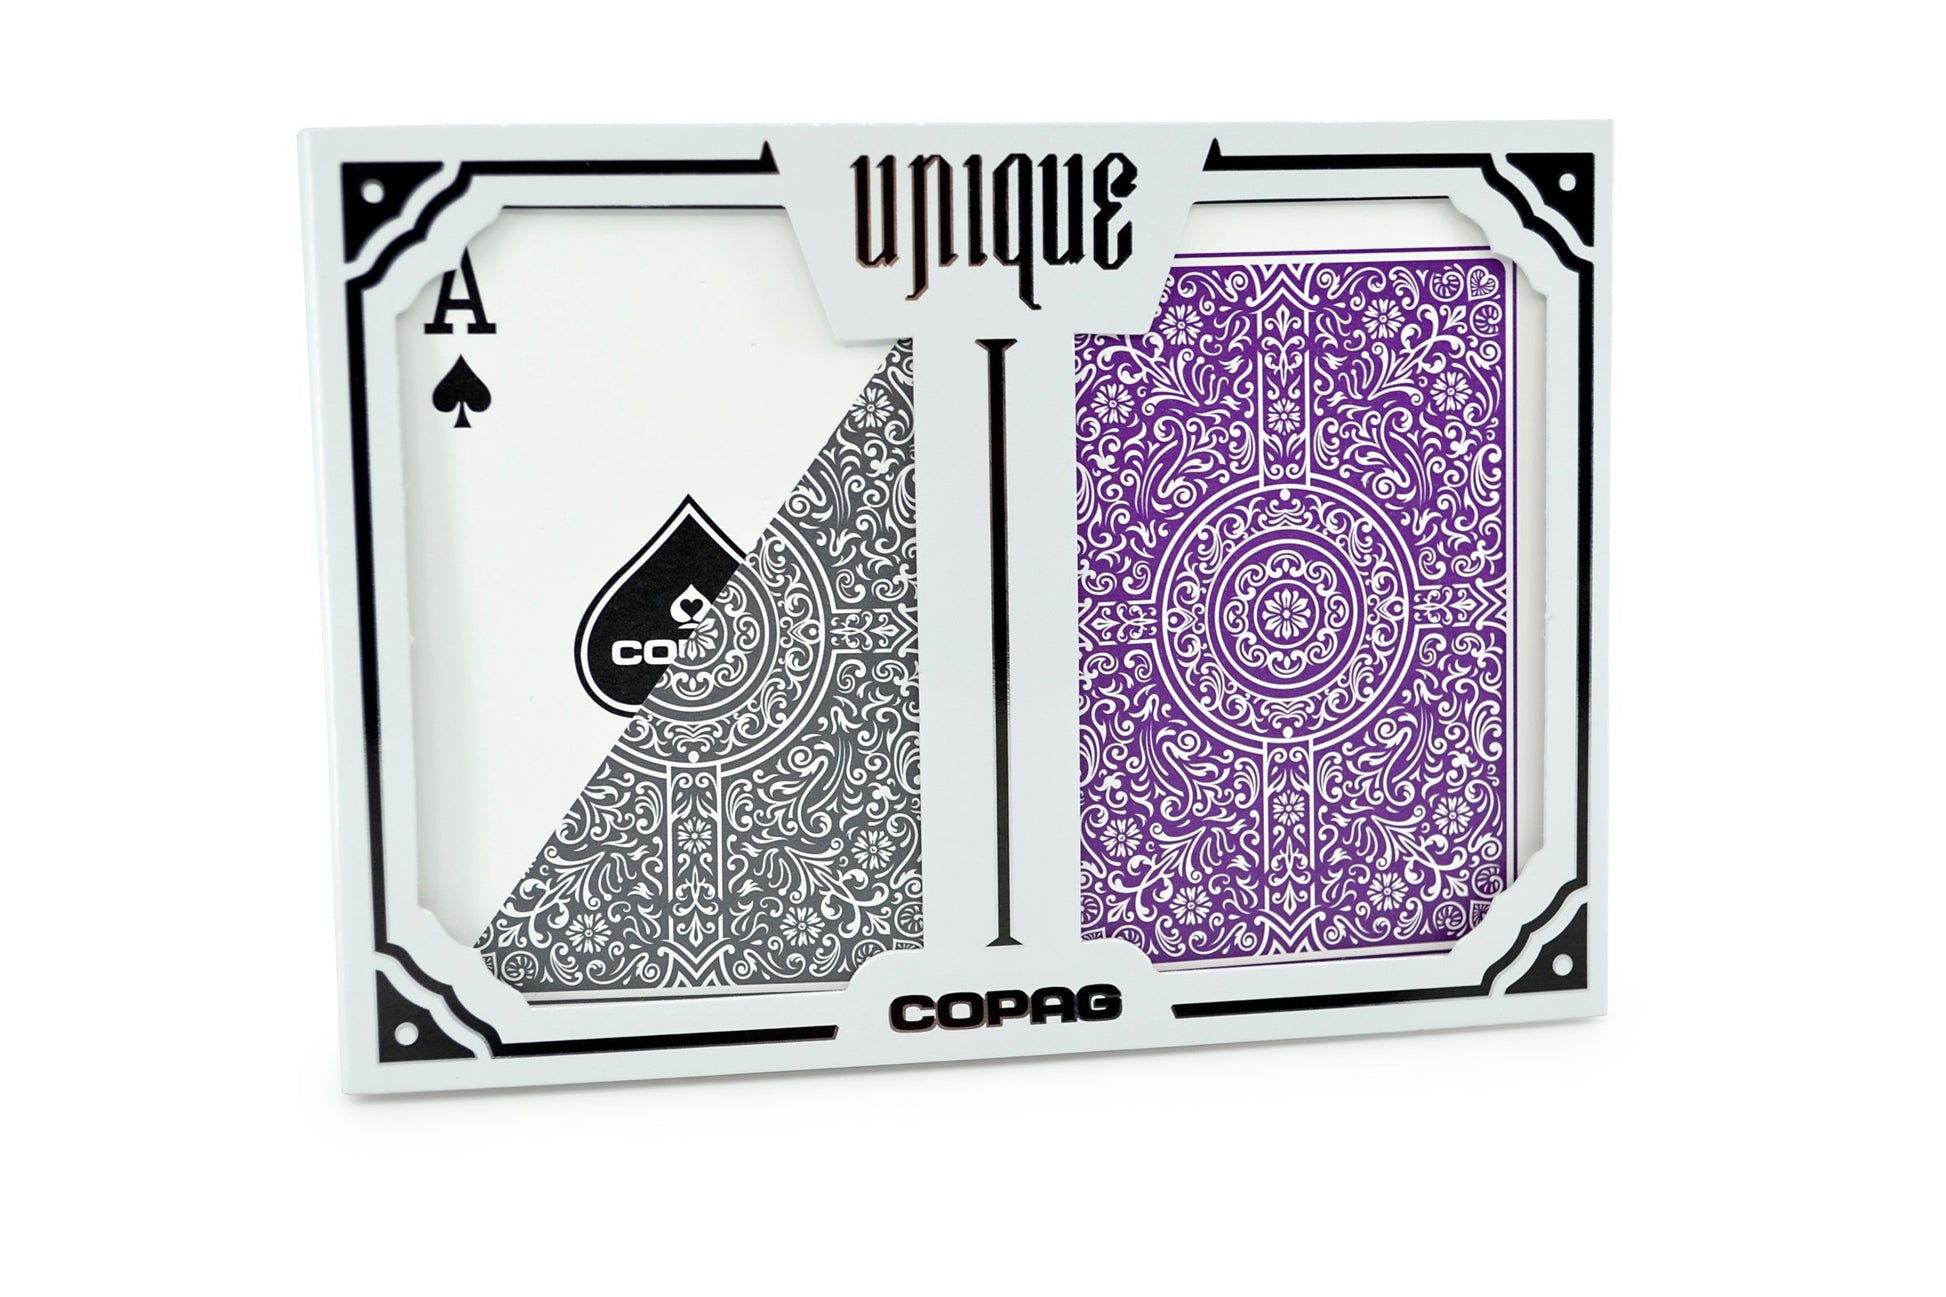 COPAG UNIQUE POKER SIZE REGULAR UV Marked Cards | Poker Cheating Devices